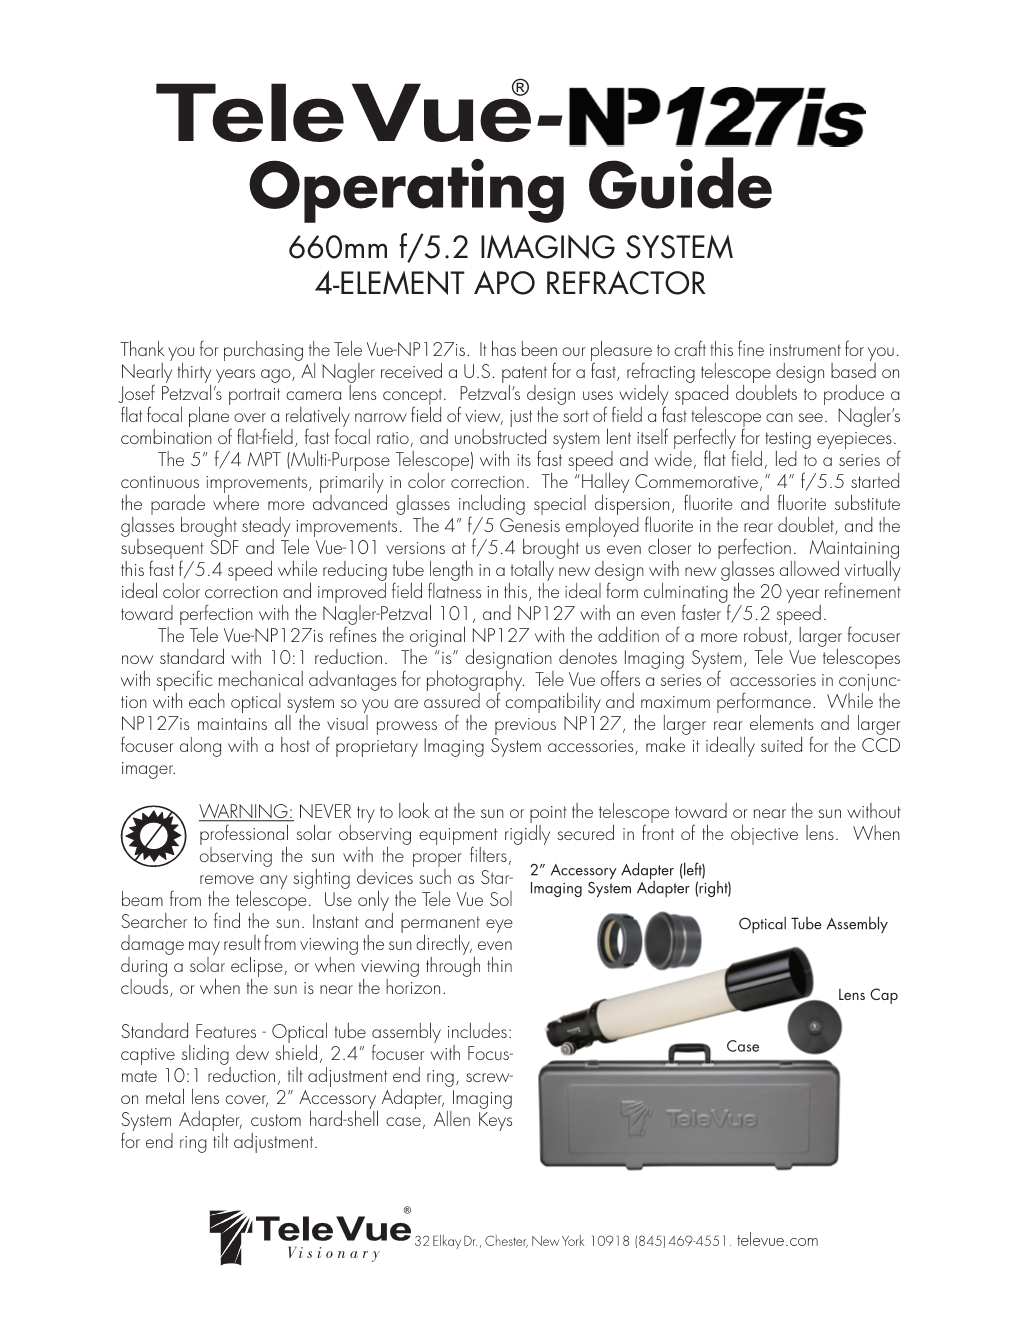 Tele Vue-Np127is Operating Guide